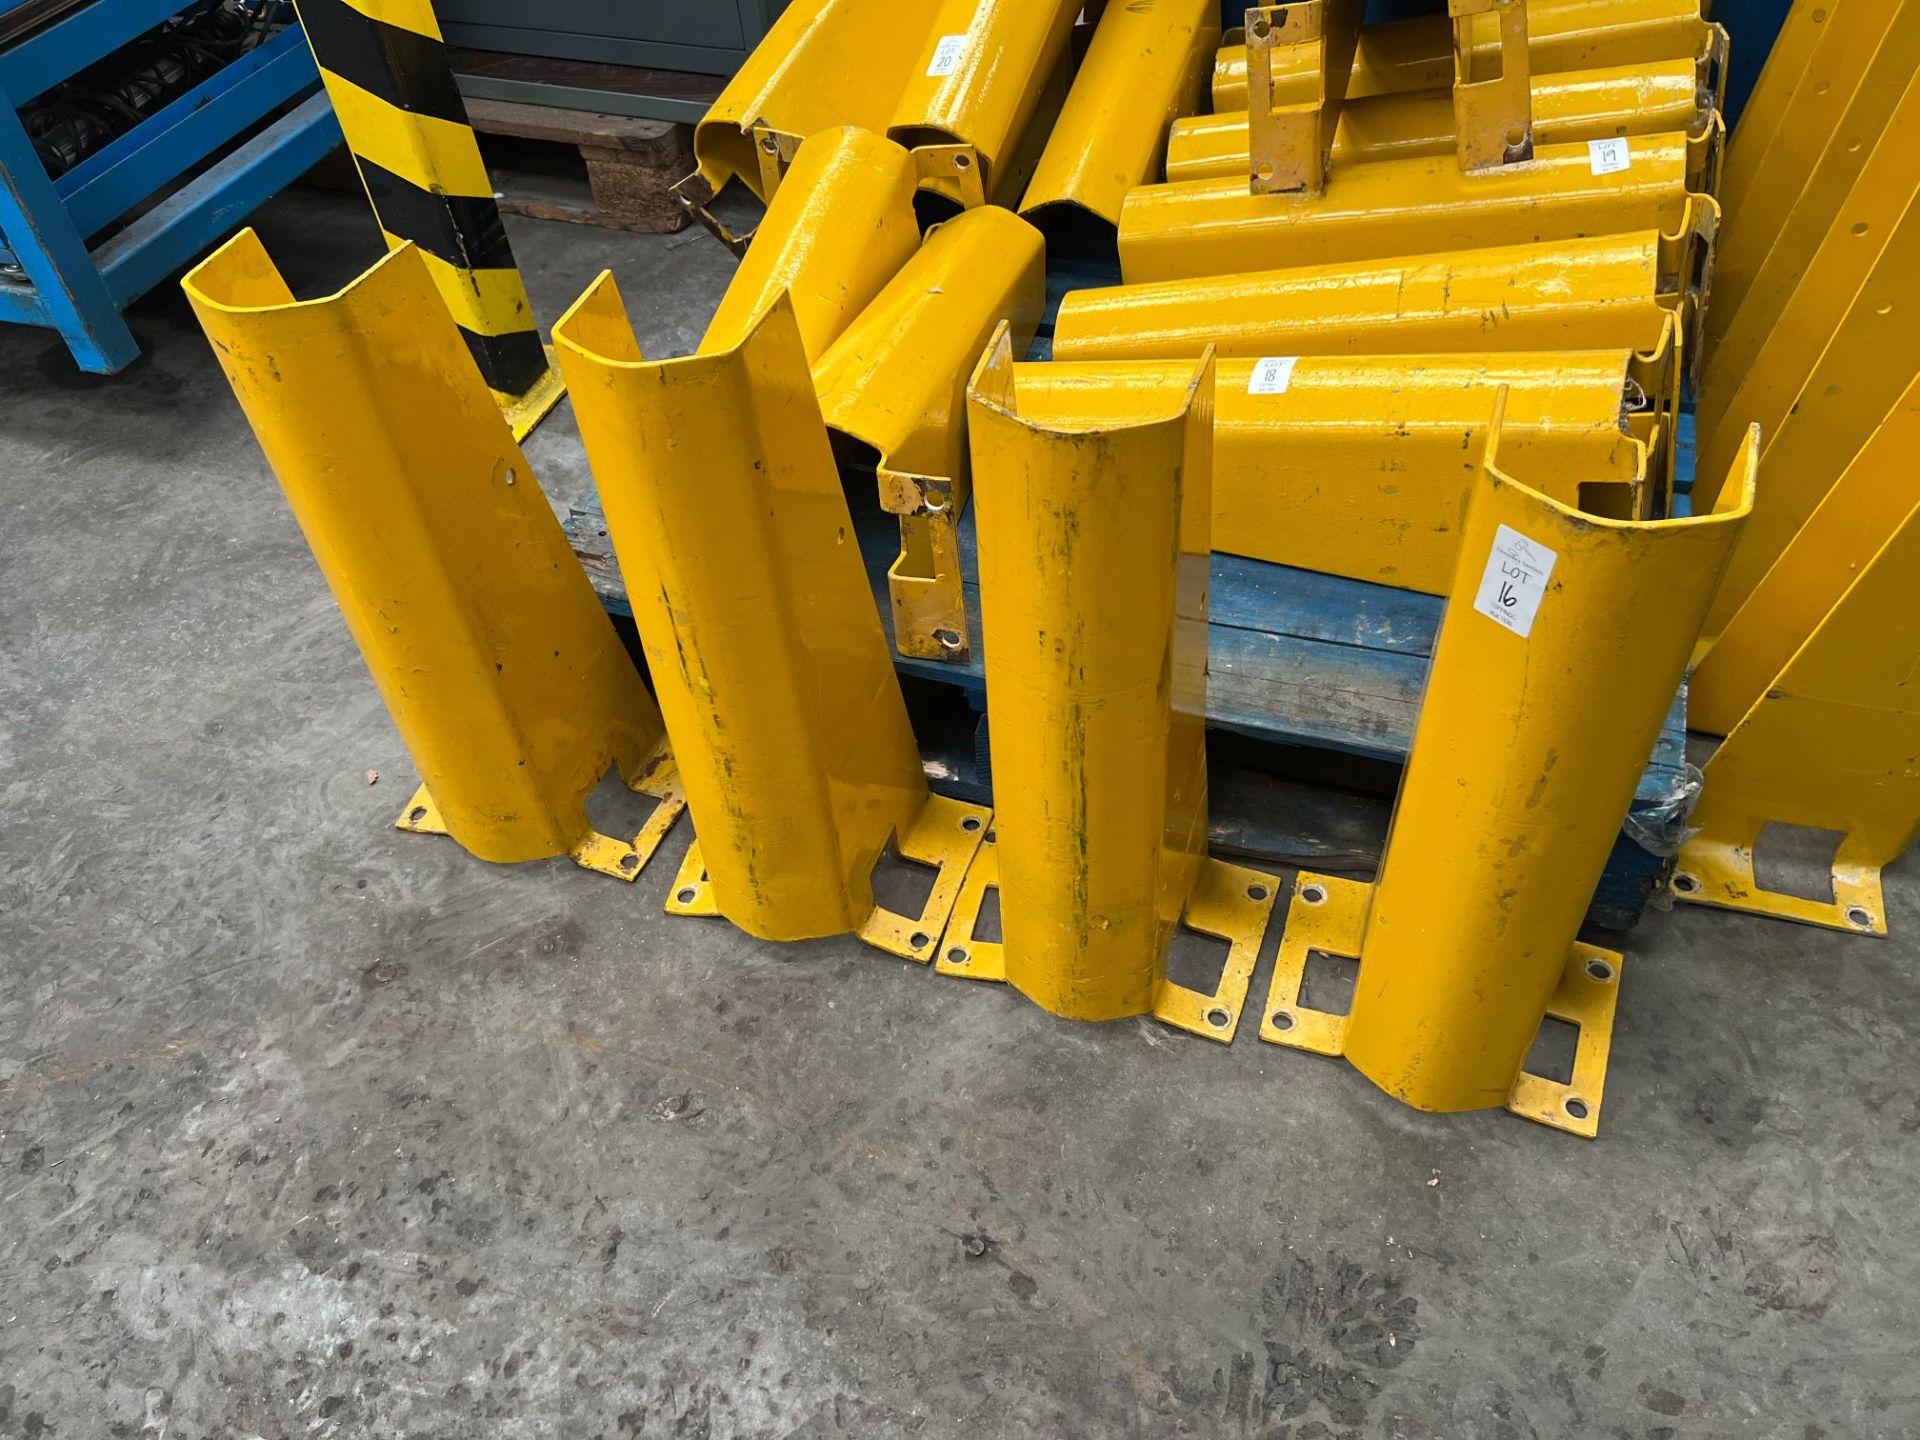 4X YELLOW STEEL PALLET RACKING SAFETY GUARDS